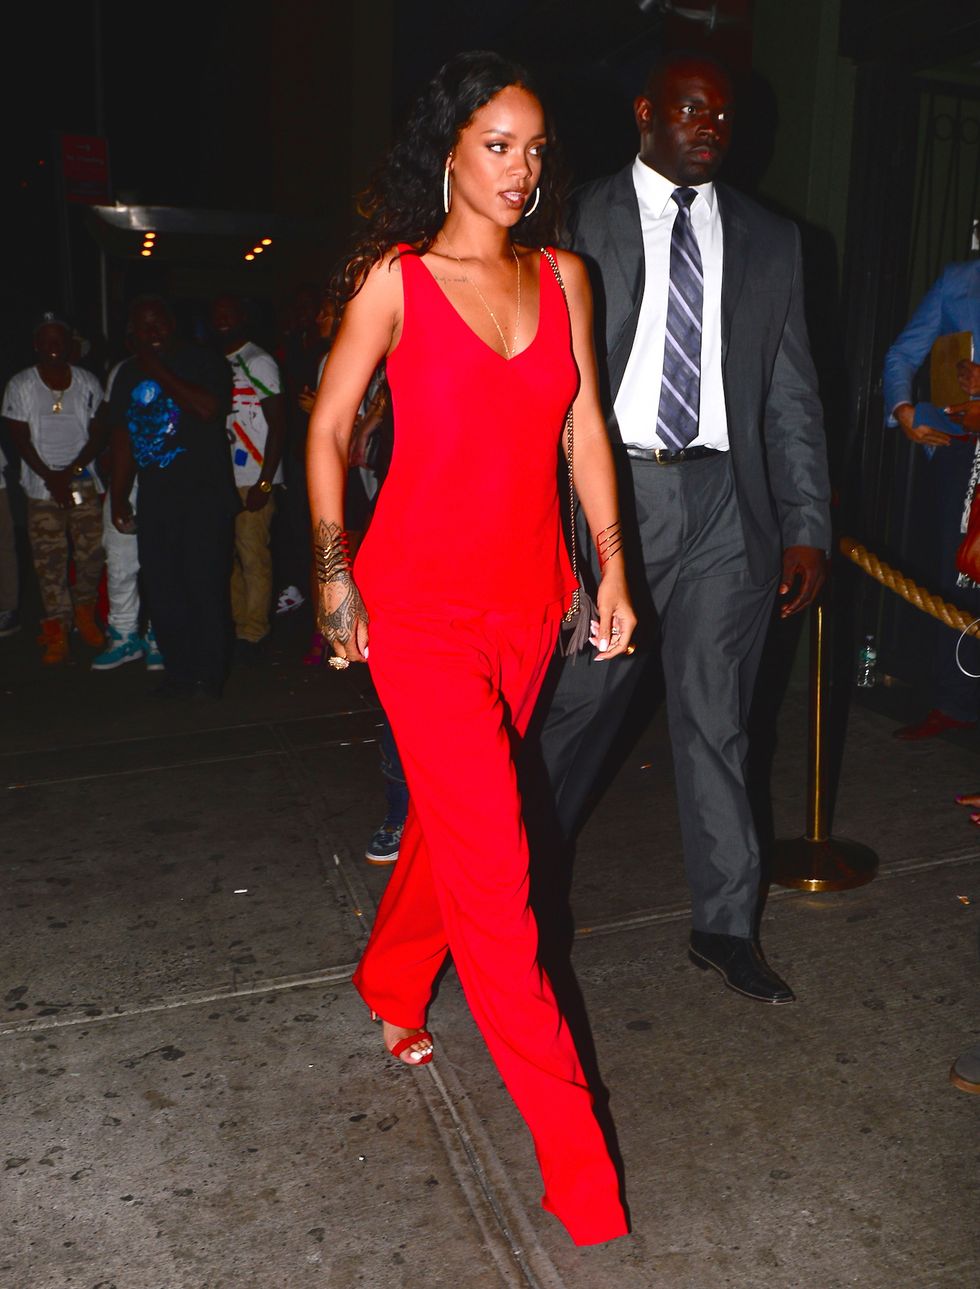 Rihanna wearing a red jumpsuit at a New York Fashion Week party